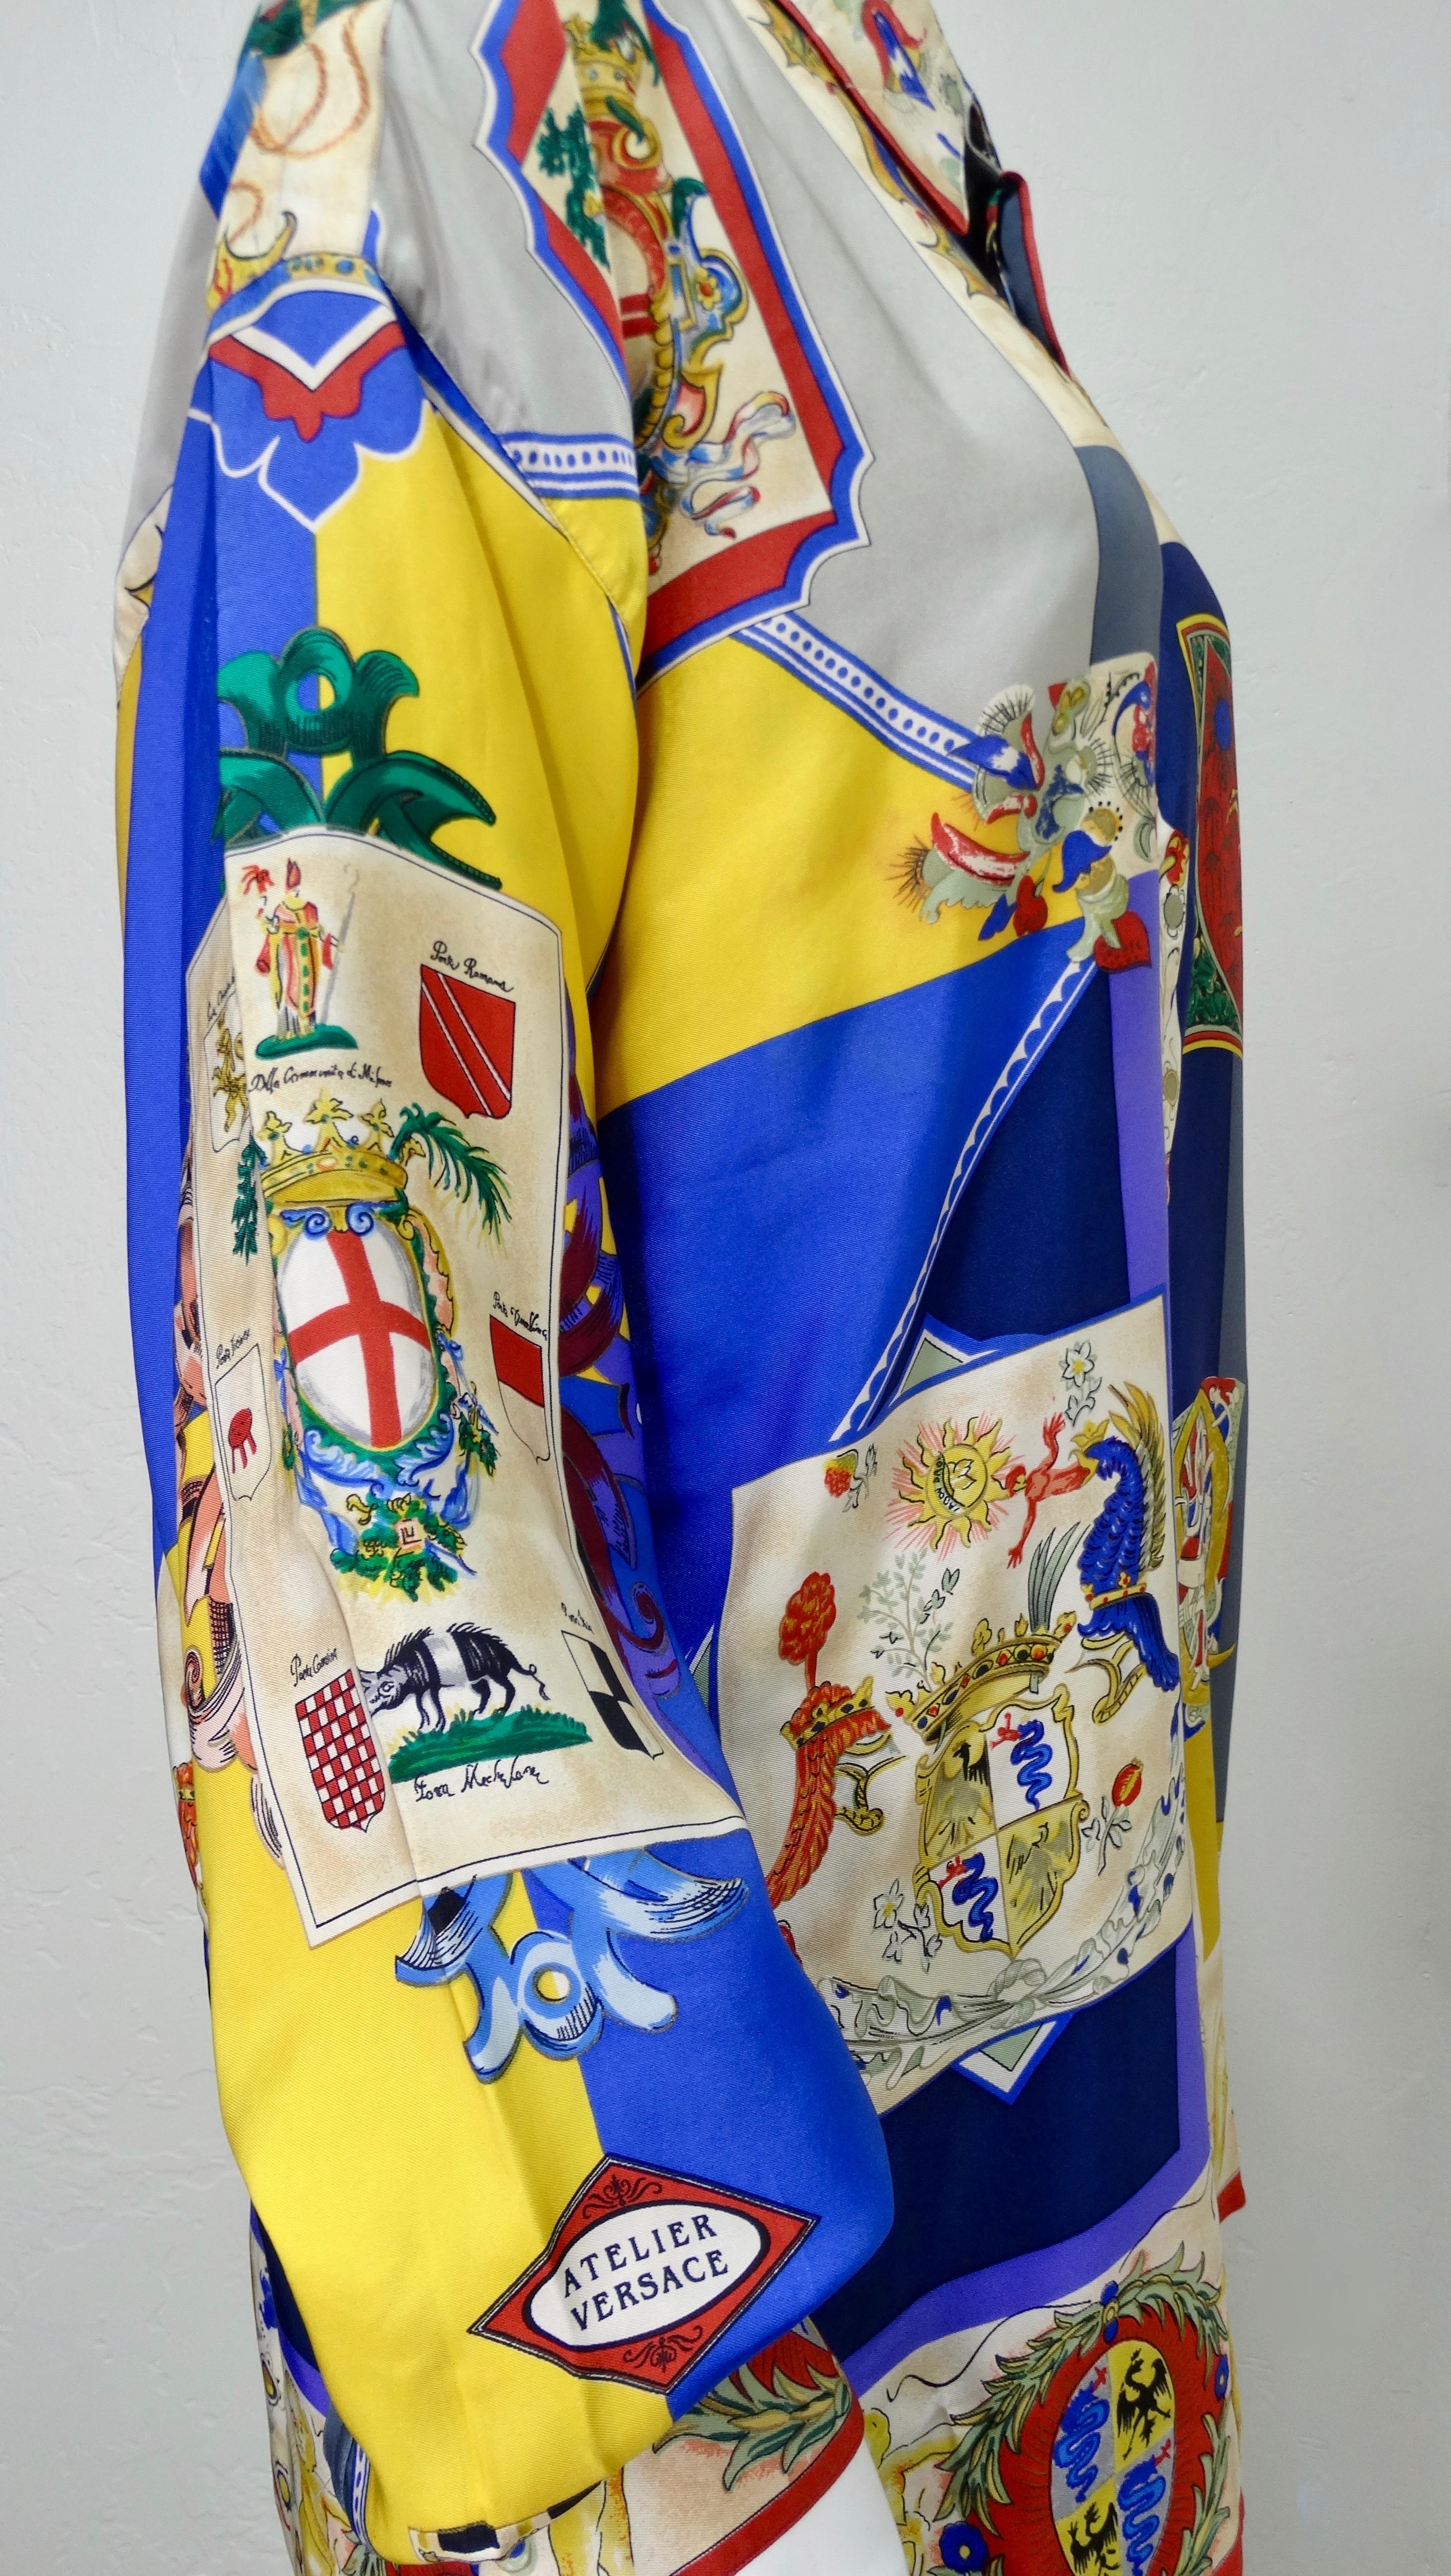 Gianni Versace 1990s Coat of Arms Silk Shirt  In Good Condition For Sale In Scottsdale, AZ